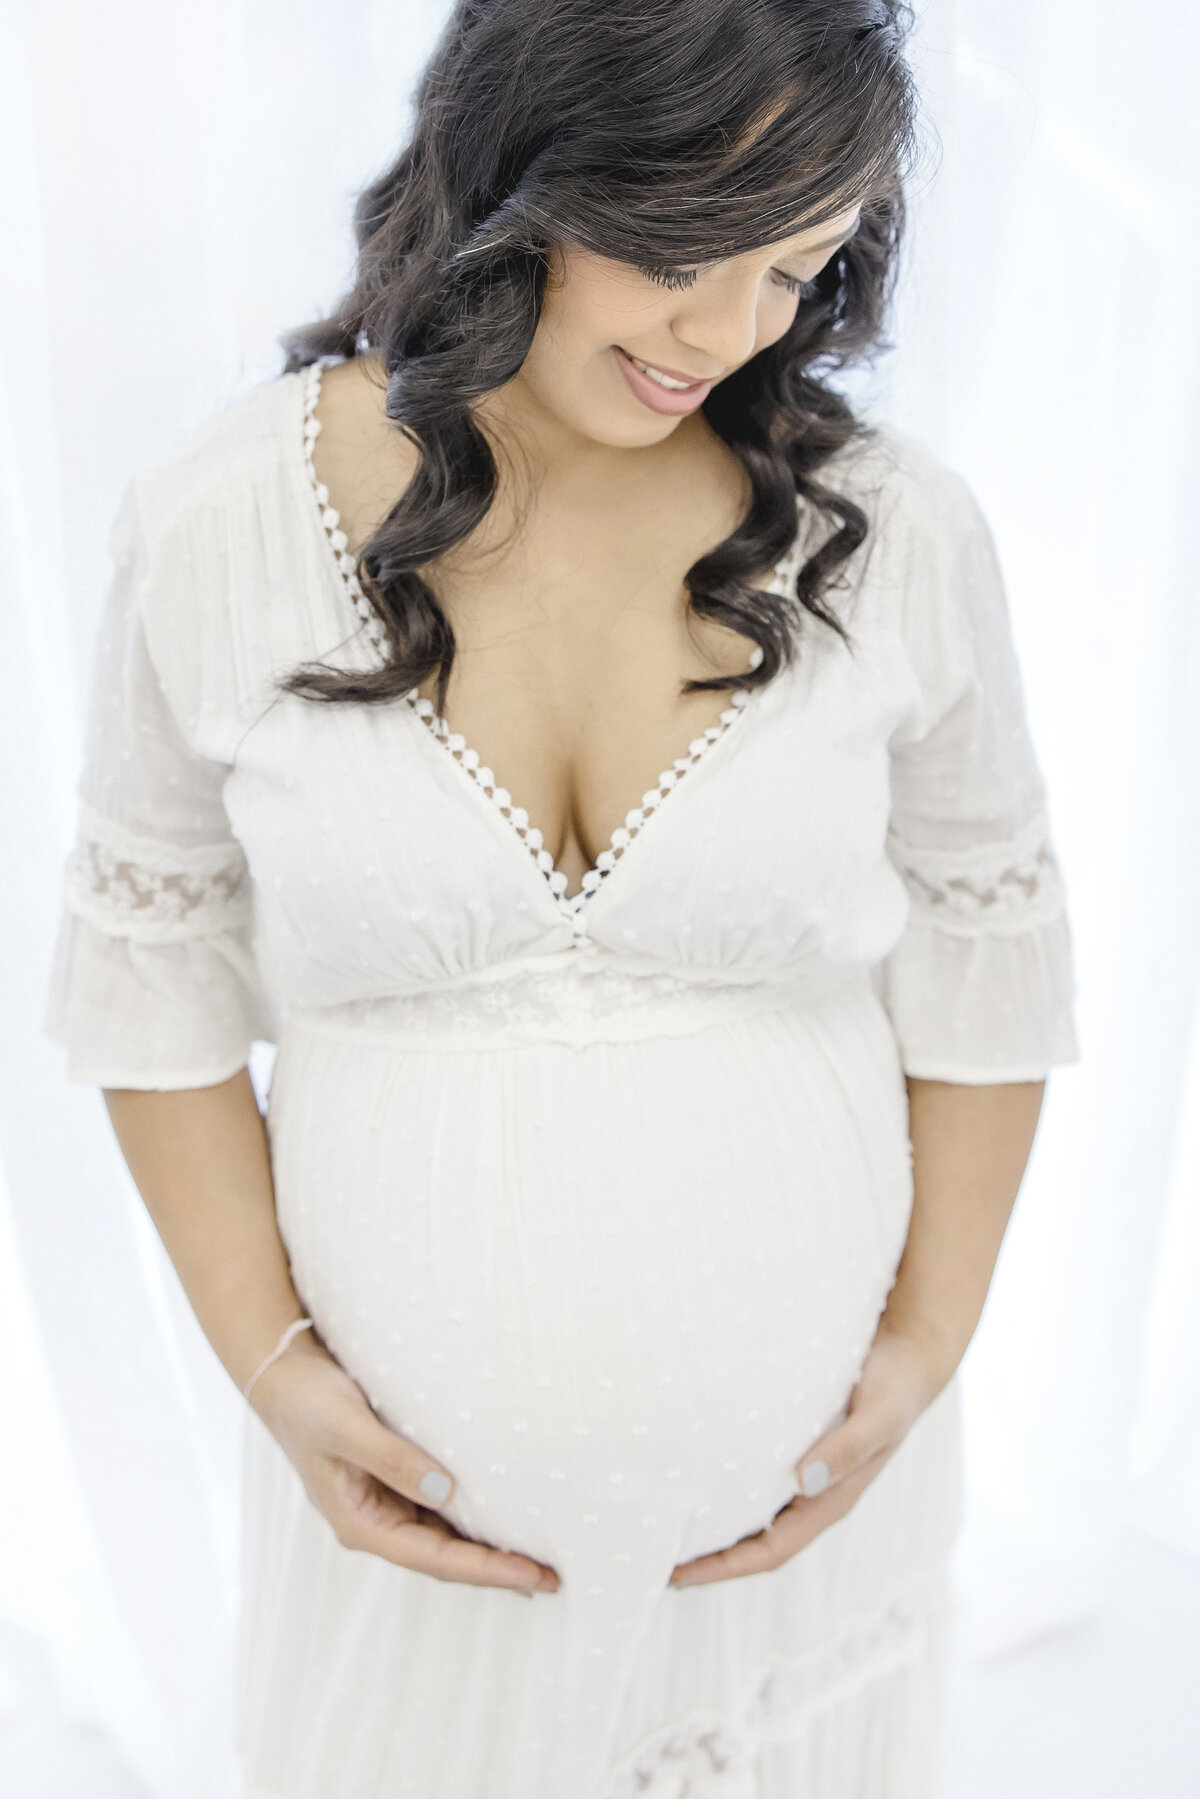 Pregnant woman in white dress looking down at belly